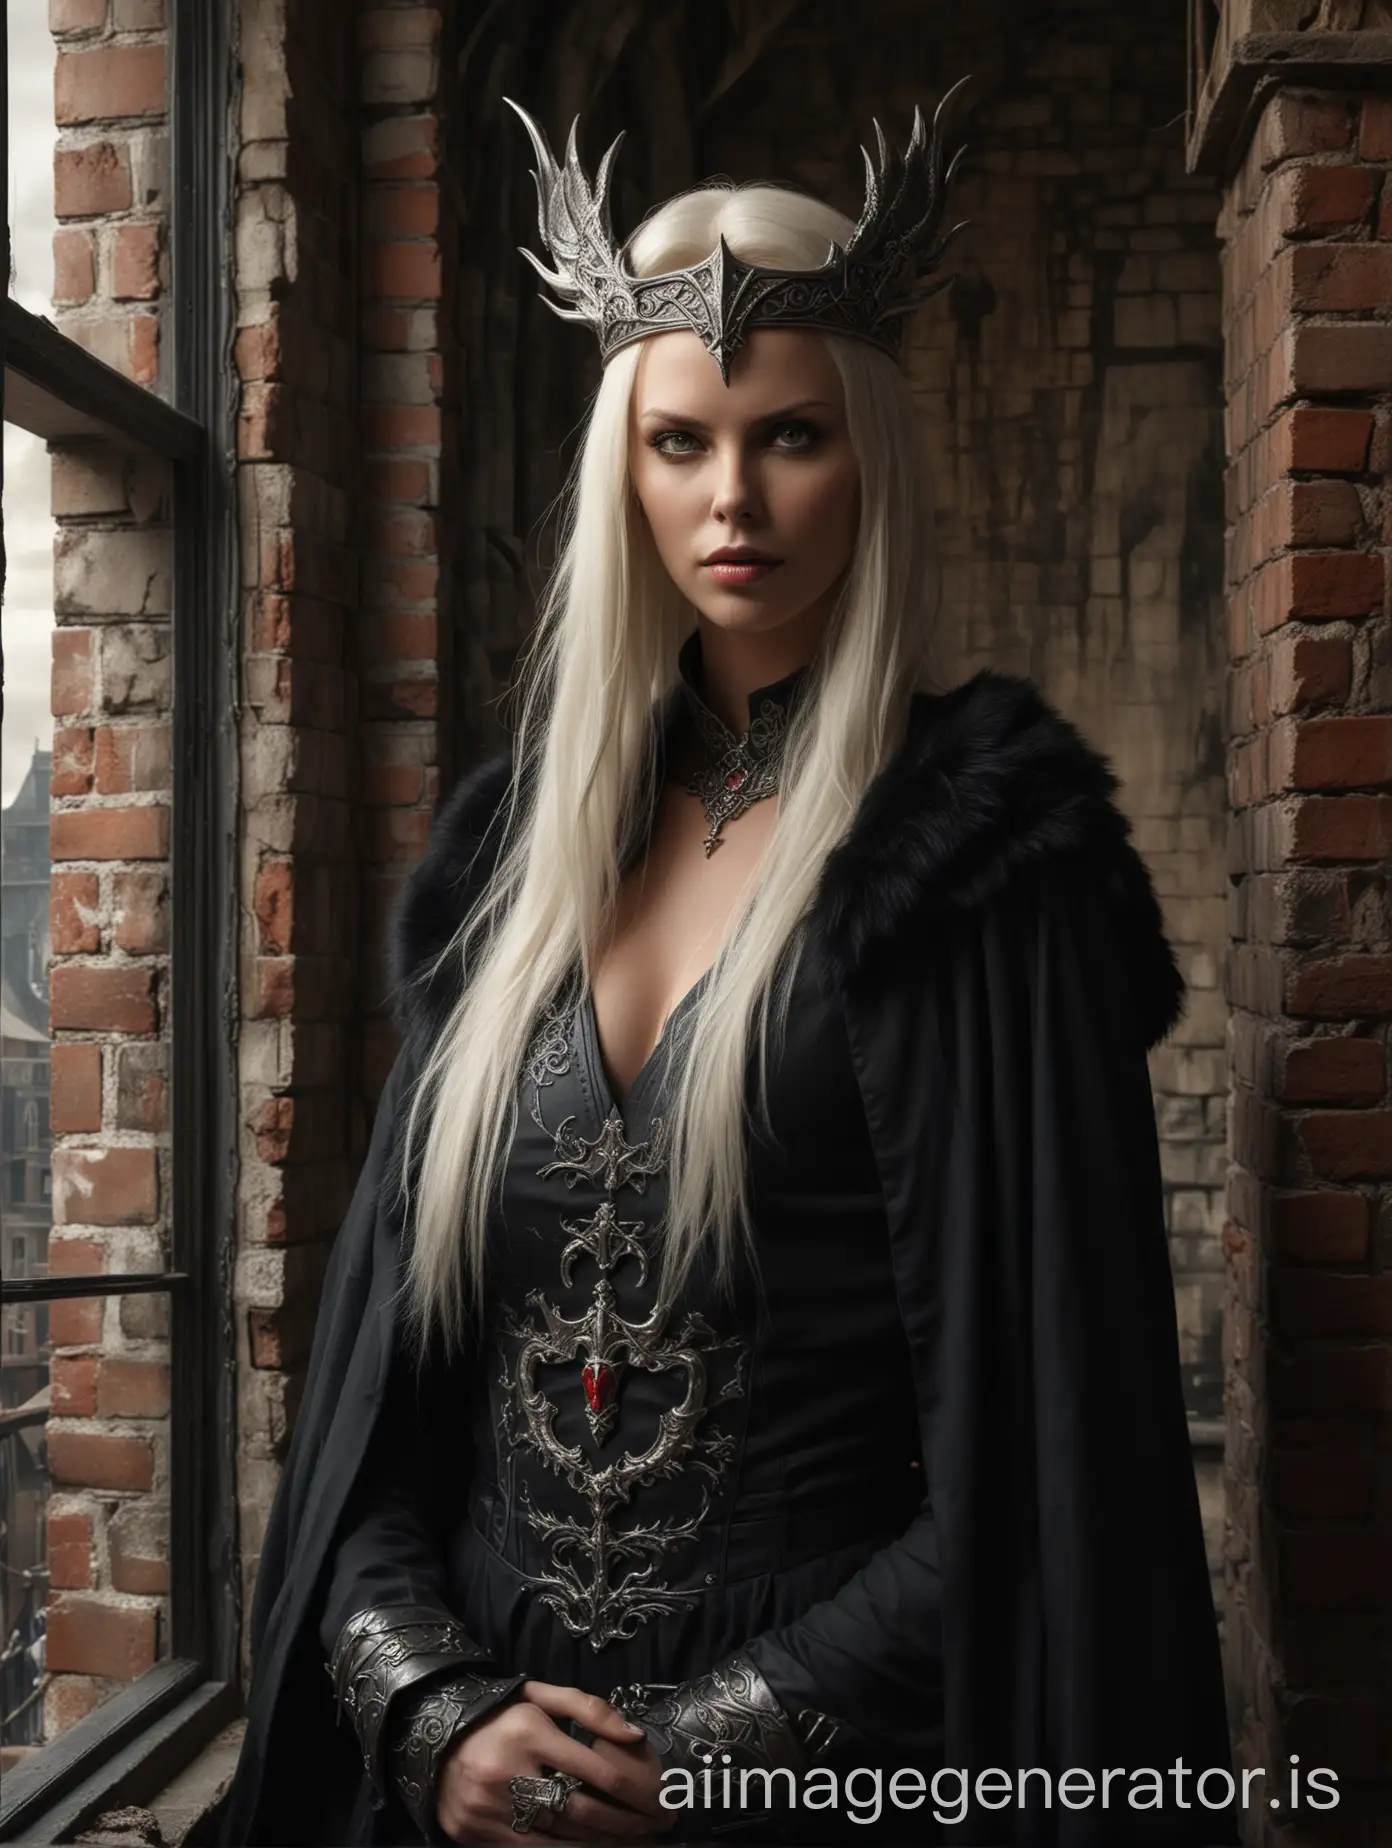 portrait closeup, charlize theron face reference, white very-long sleek hair, wearing a simple viking style crown with a dragon crest, luis royo darkart, pointed arms black coat-gown with crimson details, pointed armsleeves, ancient cityscape in the window, brickwall room, midnight backlight